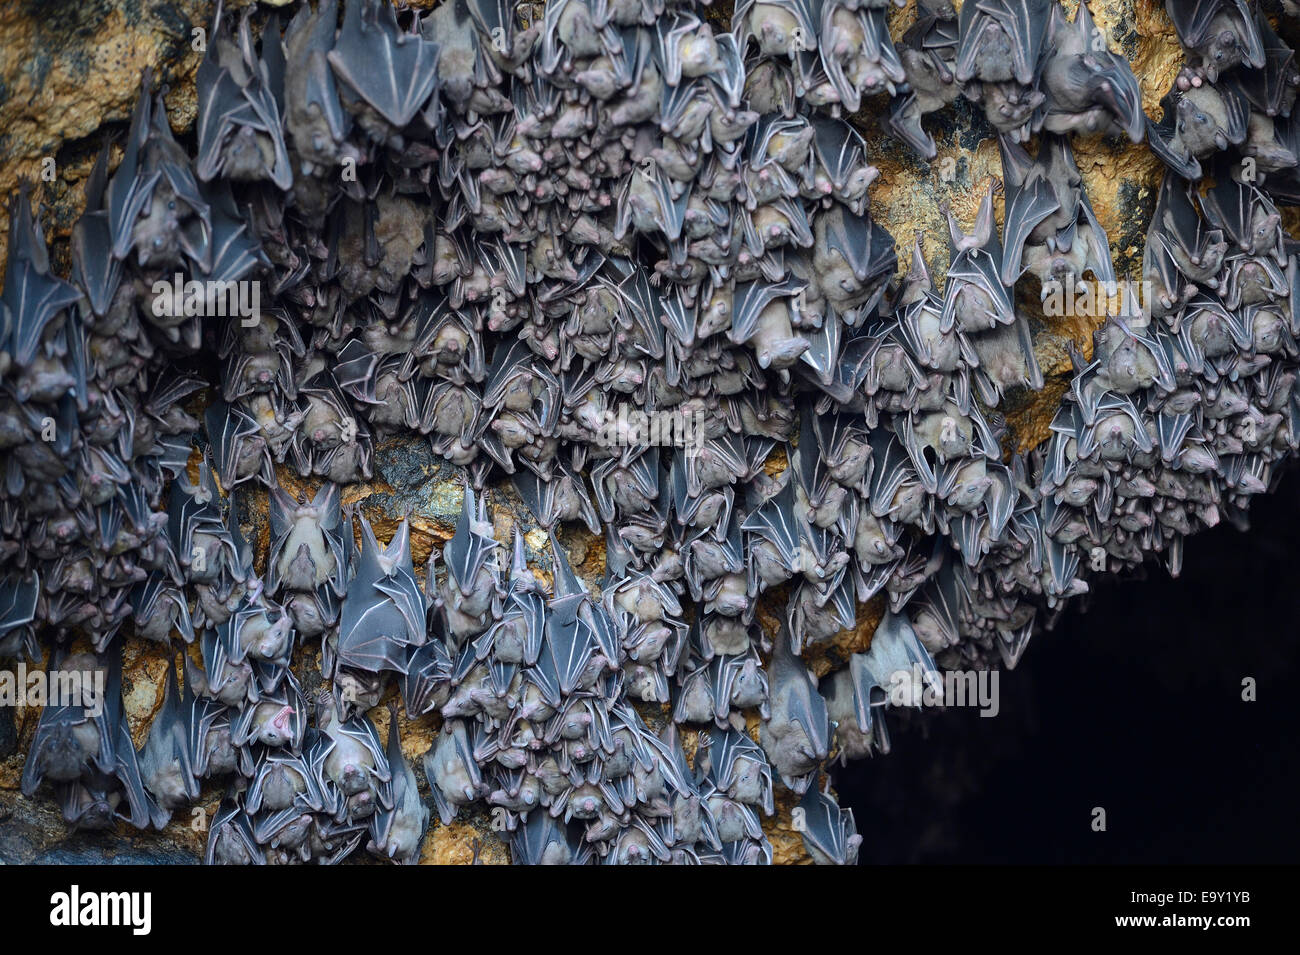 Hundreds of bats in a cave above the altar, Temple of the Bats or Goa Lawah, Bali, Indonesia Stock Photo